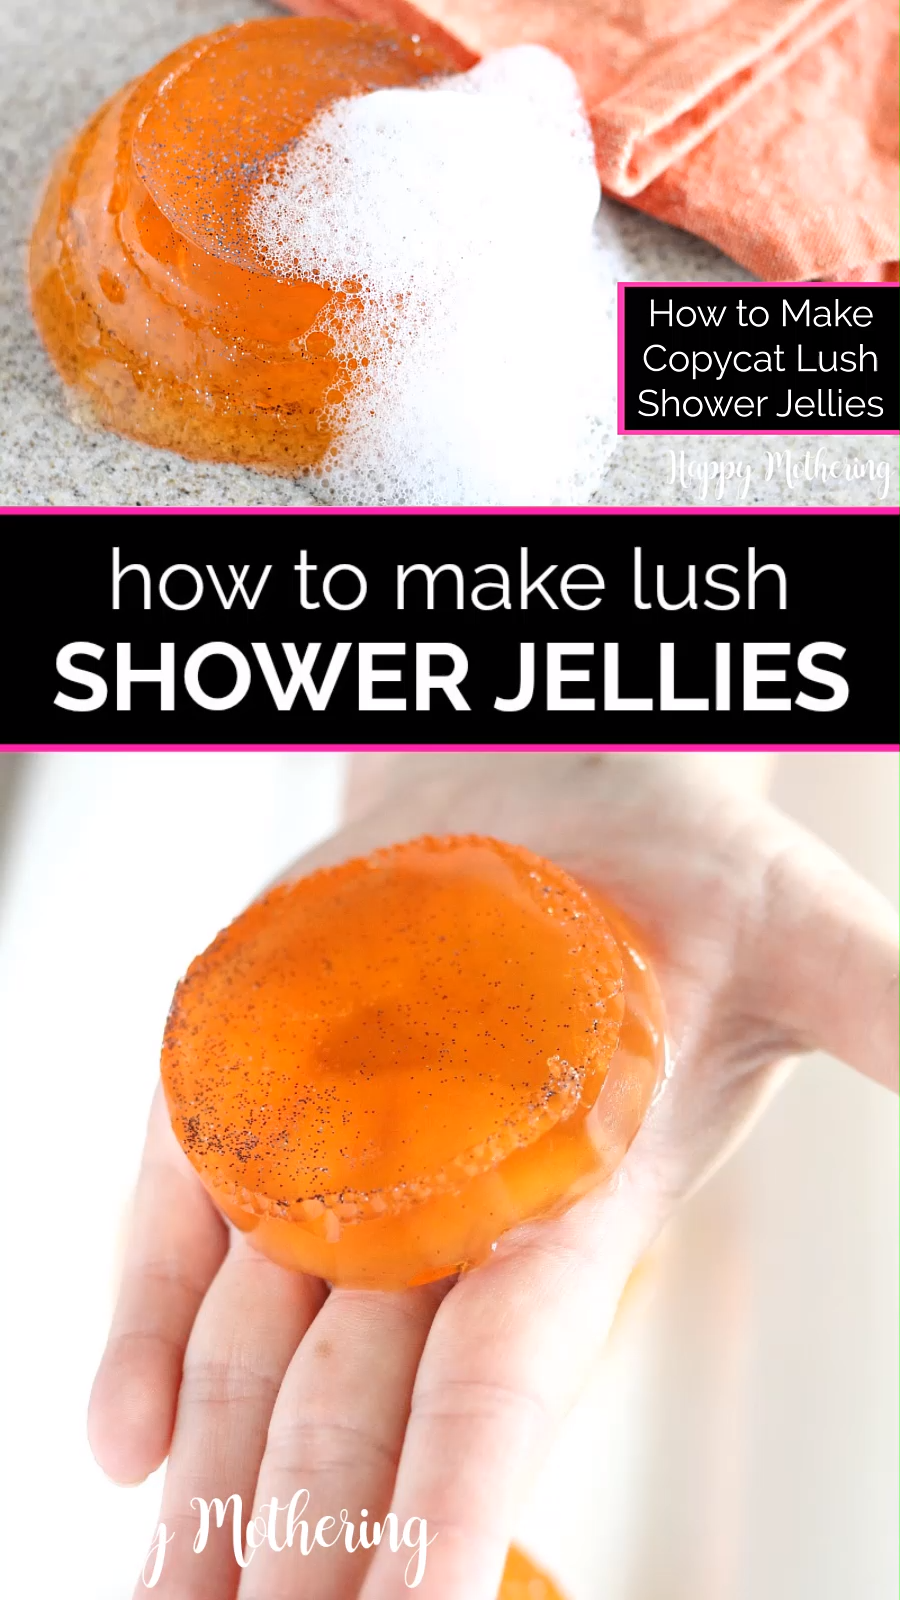 How to Make Copycat Lush Shower Jellies Video Tutorial - How to Make Copycat Lush Shower Jellies Video Tutorial -   16 productos de belleza beauty Products ideas